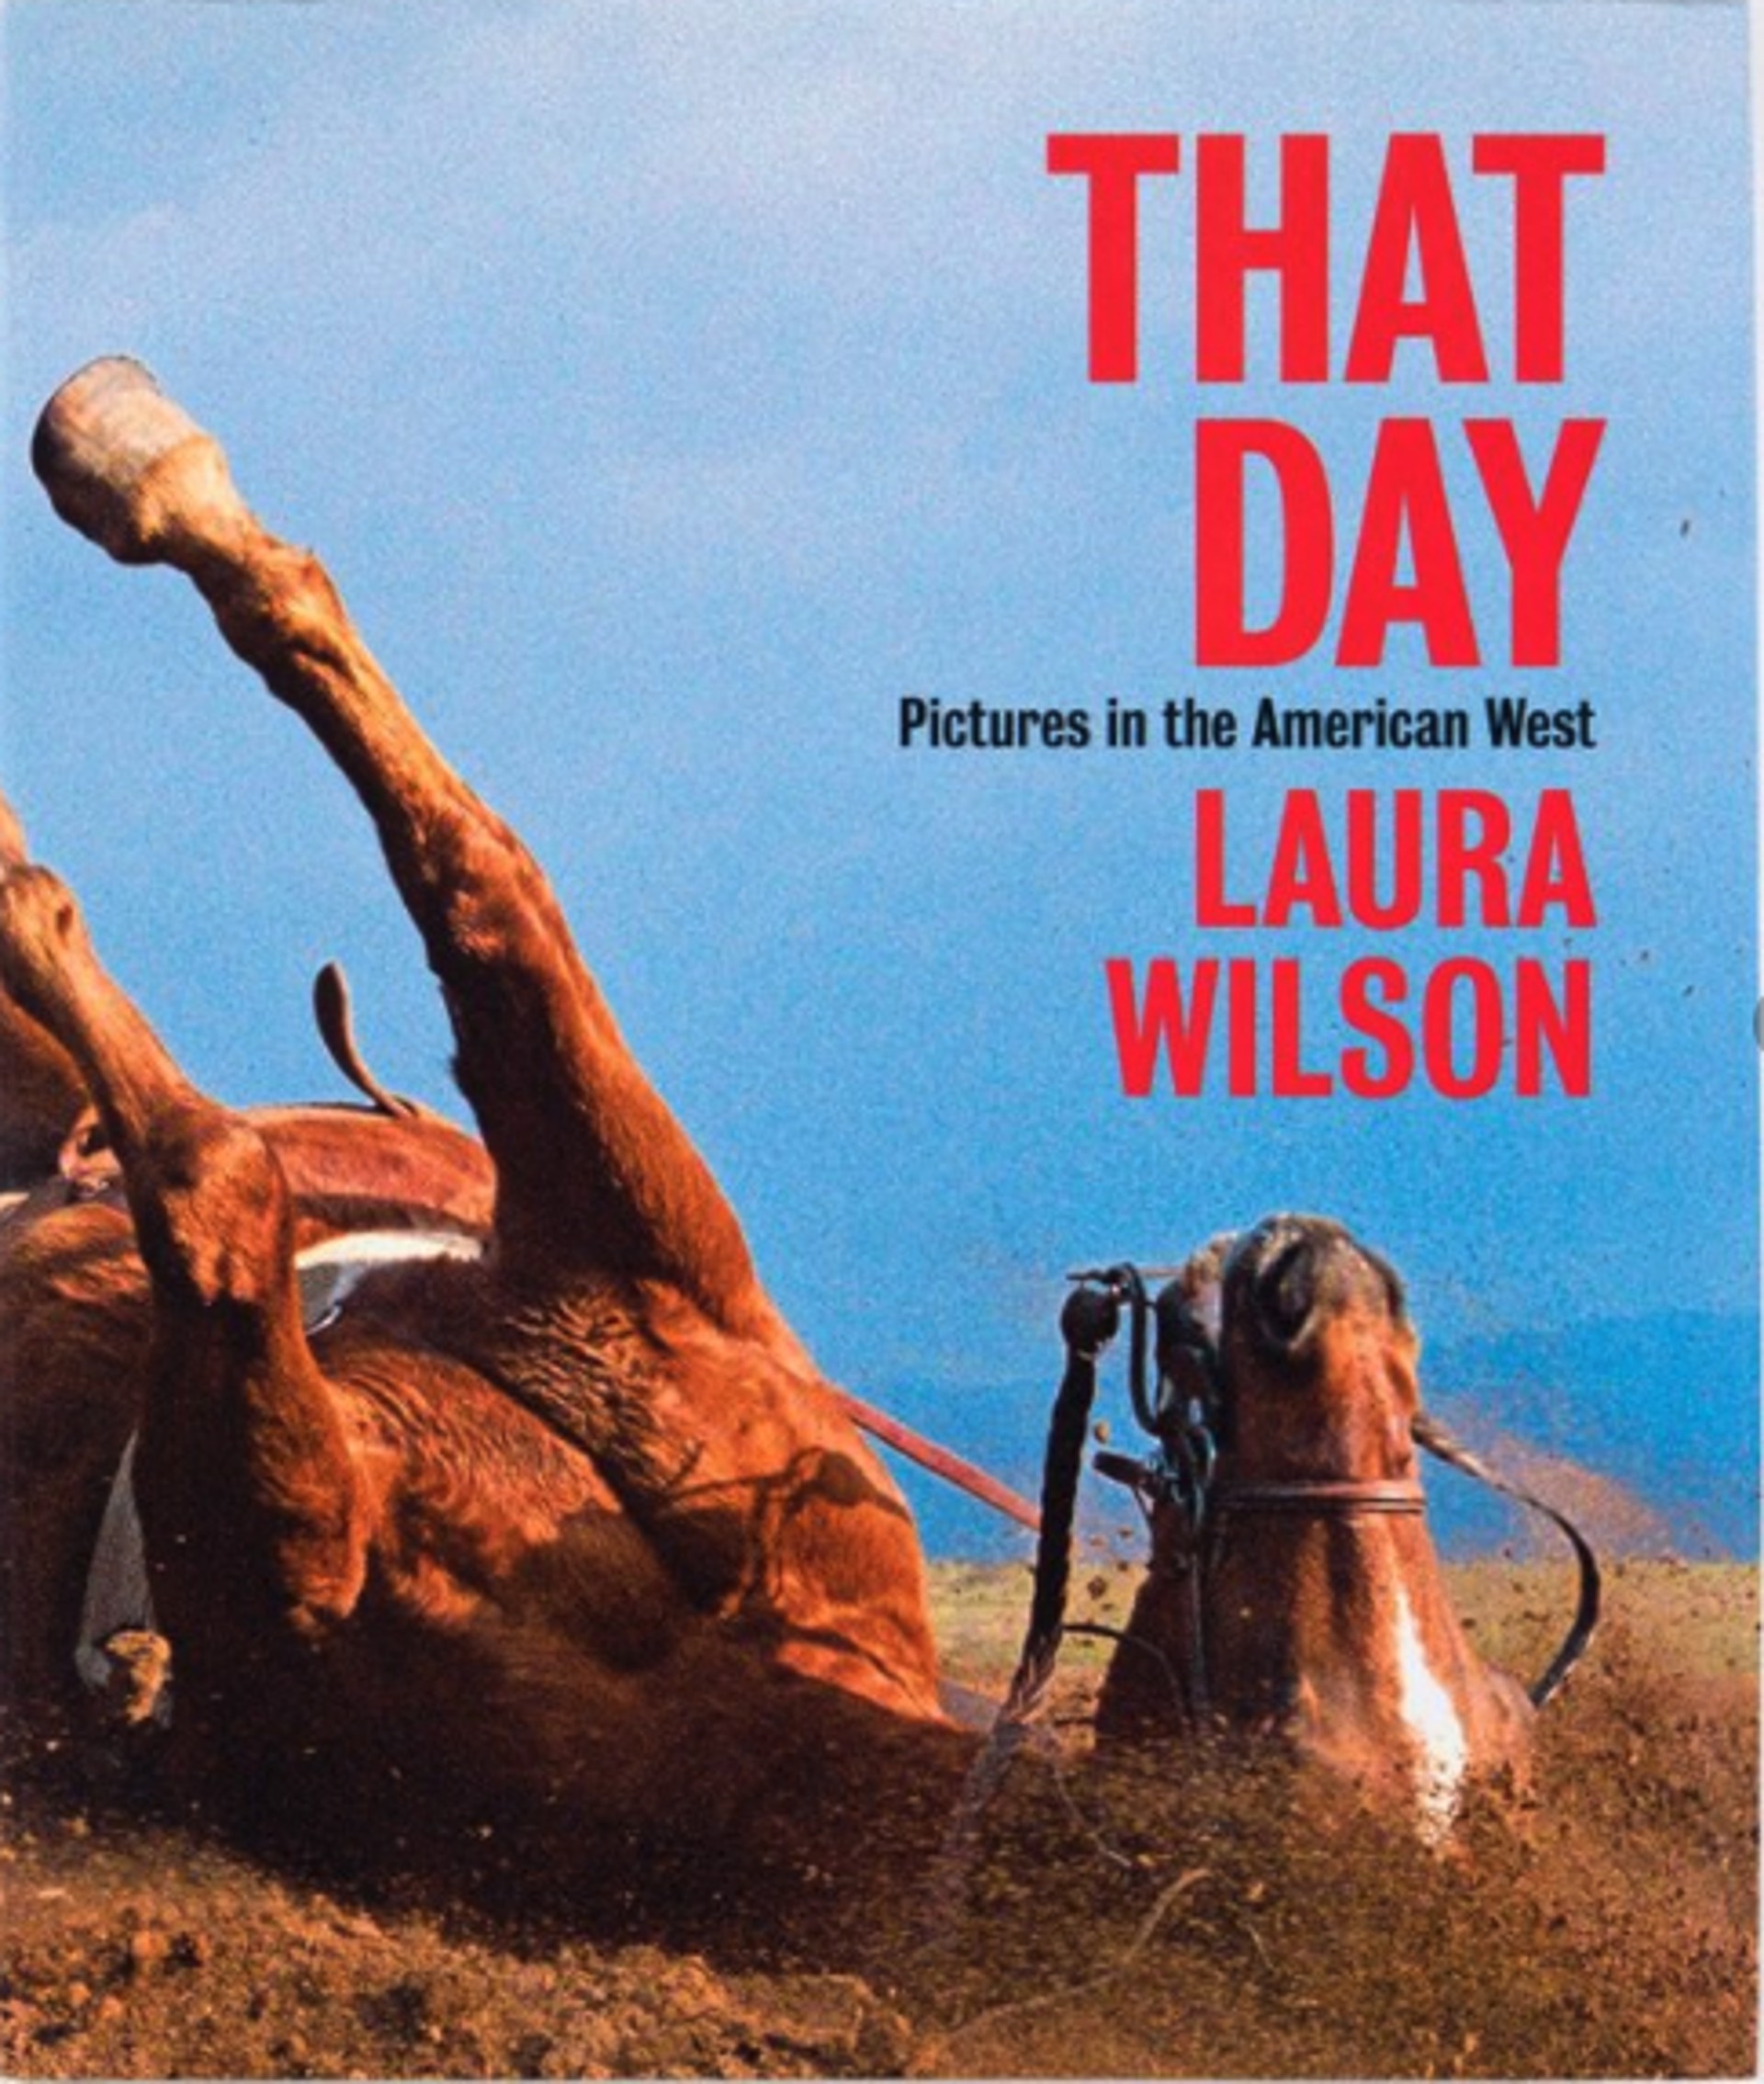 That Day - Pictures in the American West by Laura Wilson